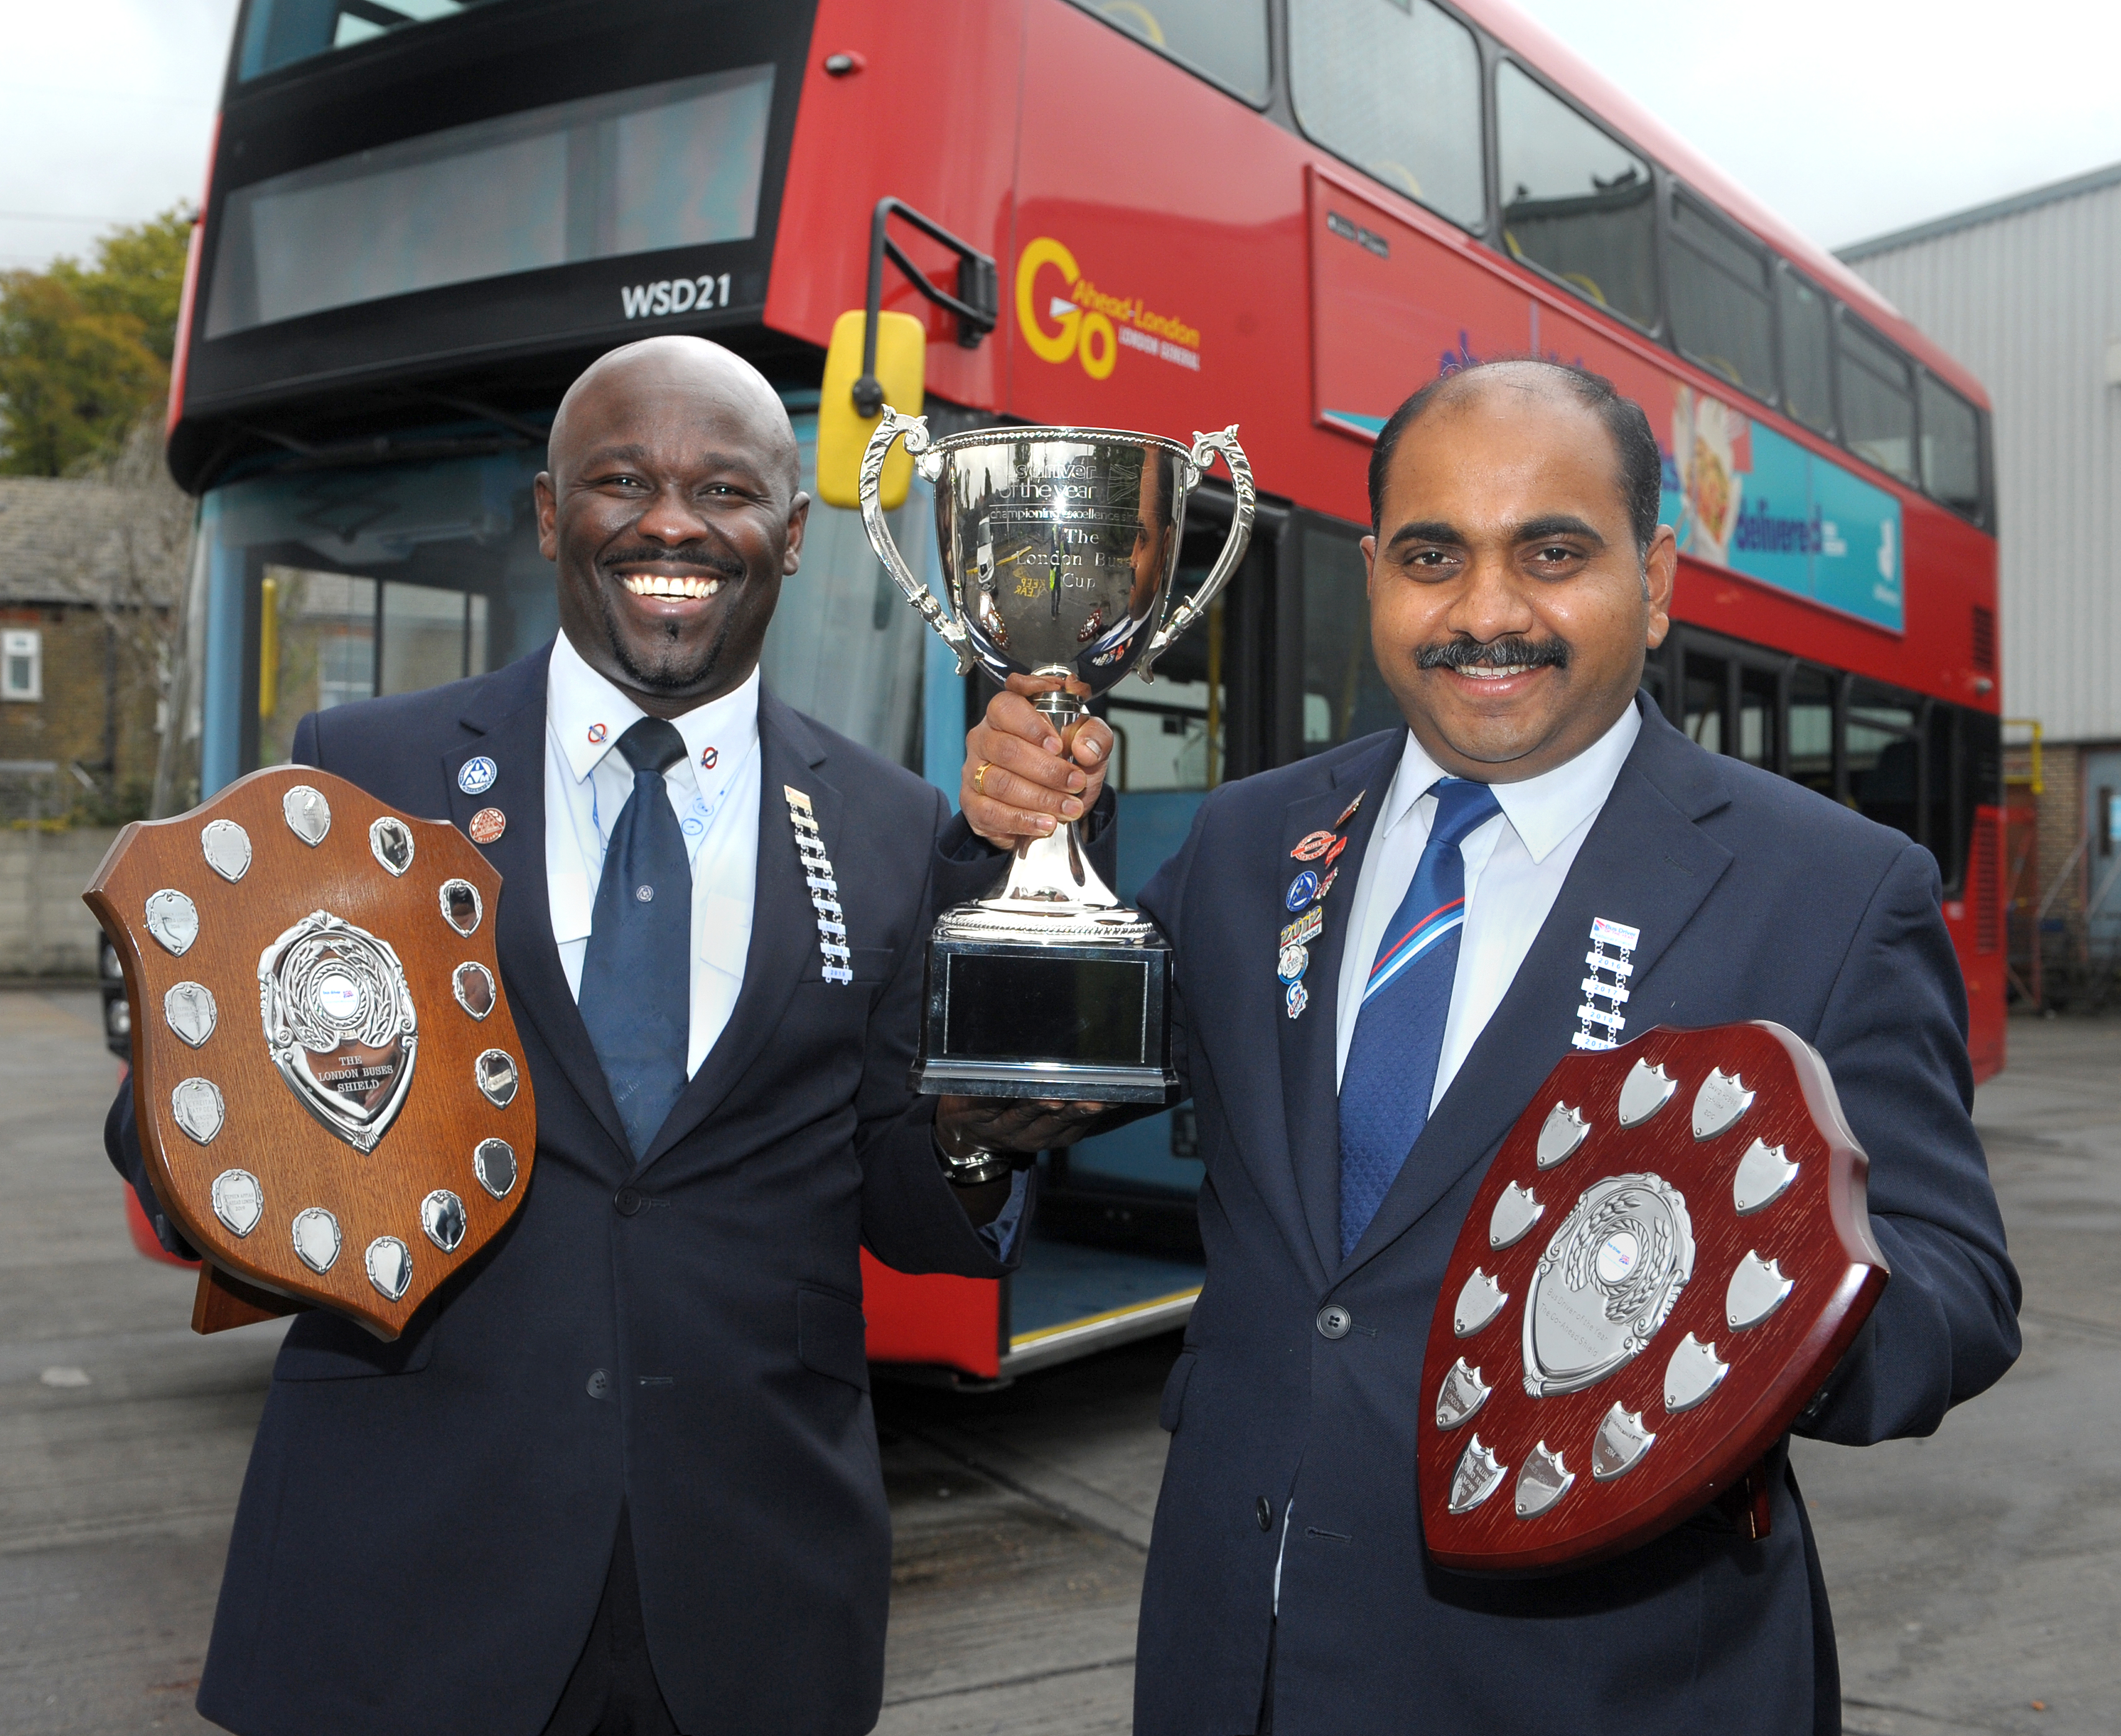 UK Bus Driver of The Year 2019